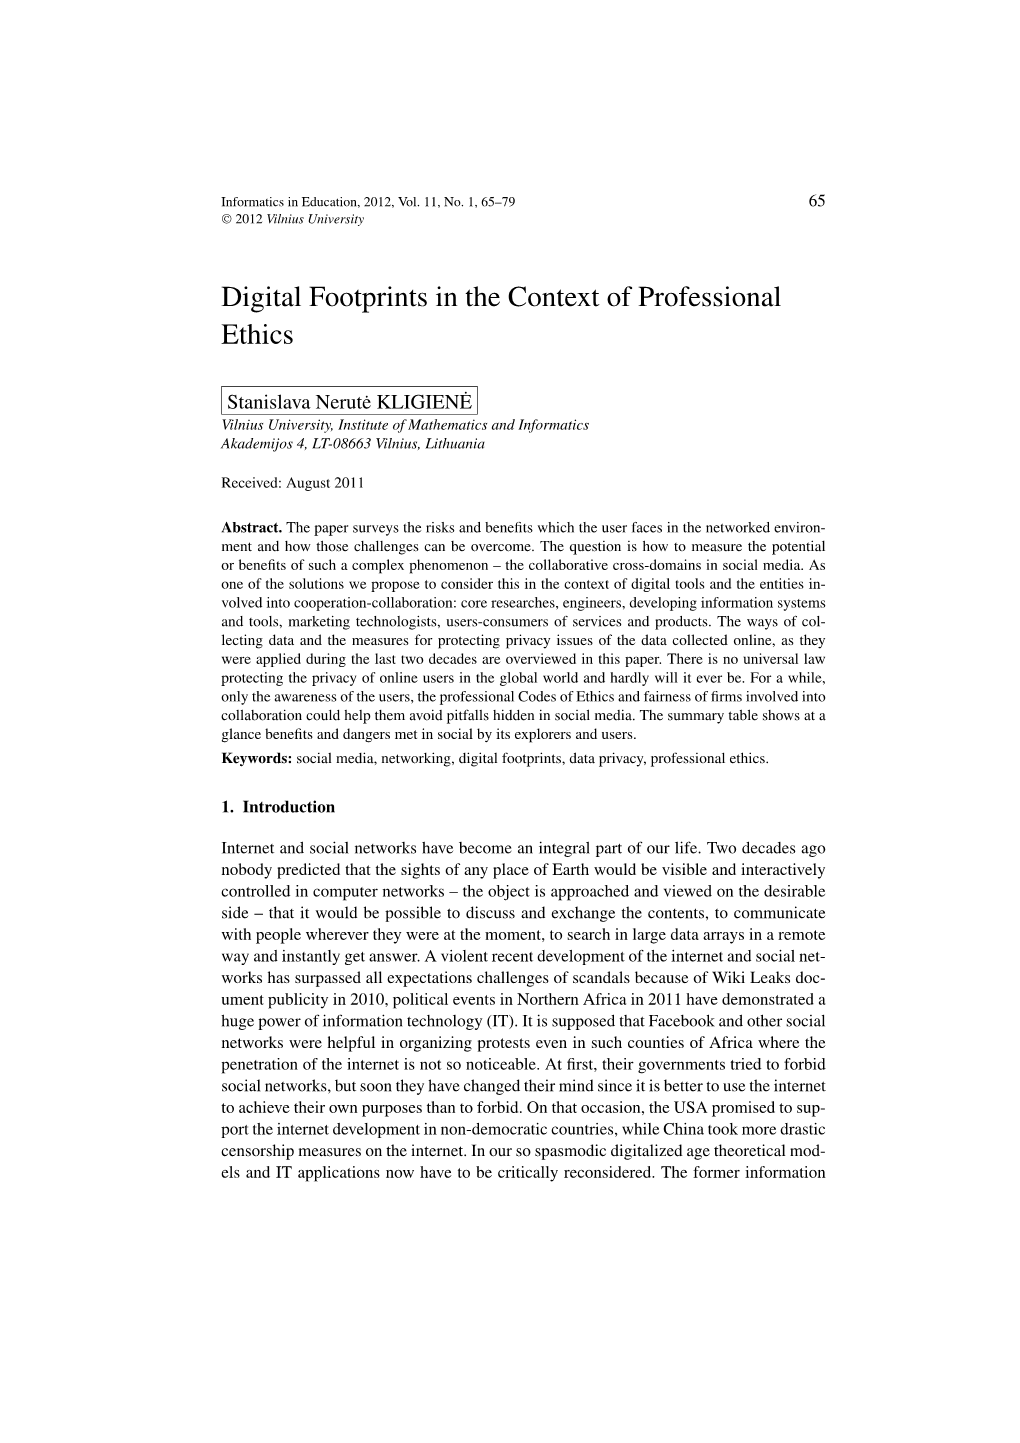 Digital Footprints in the Context of Professional Ethics